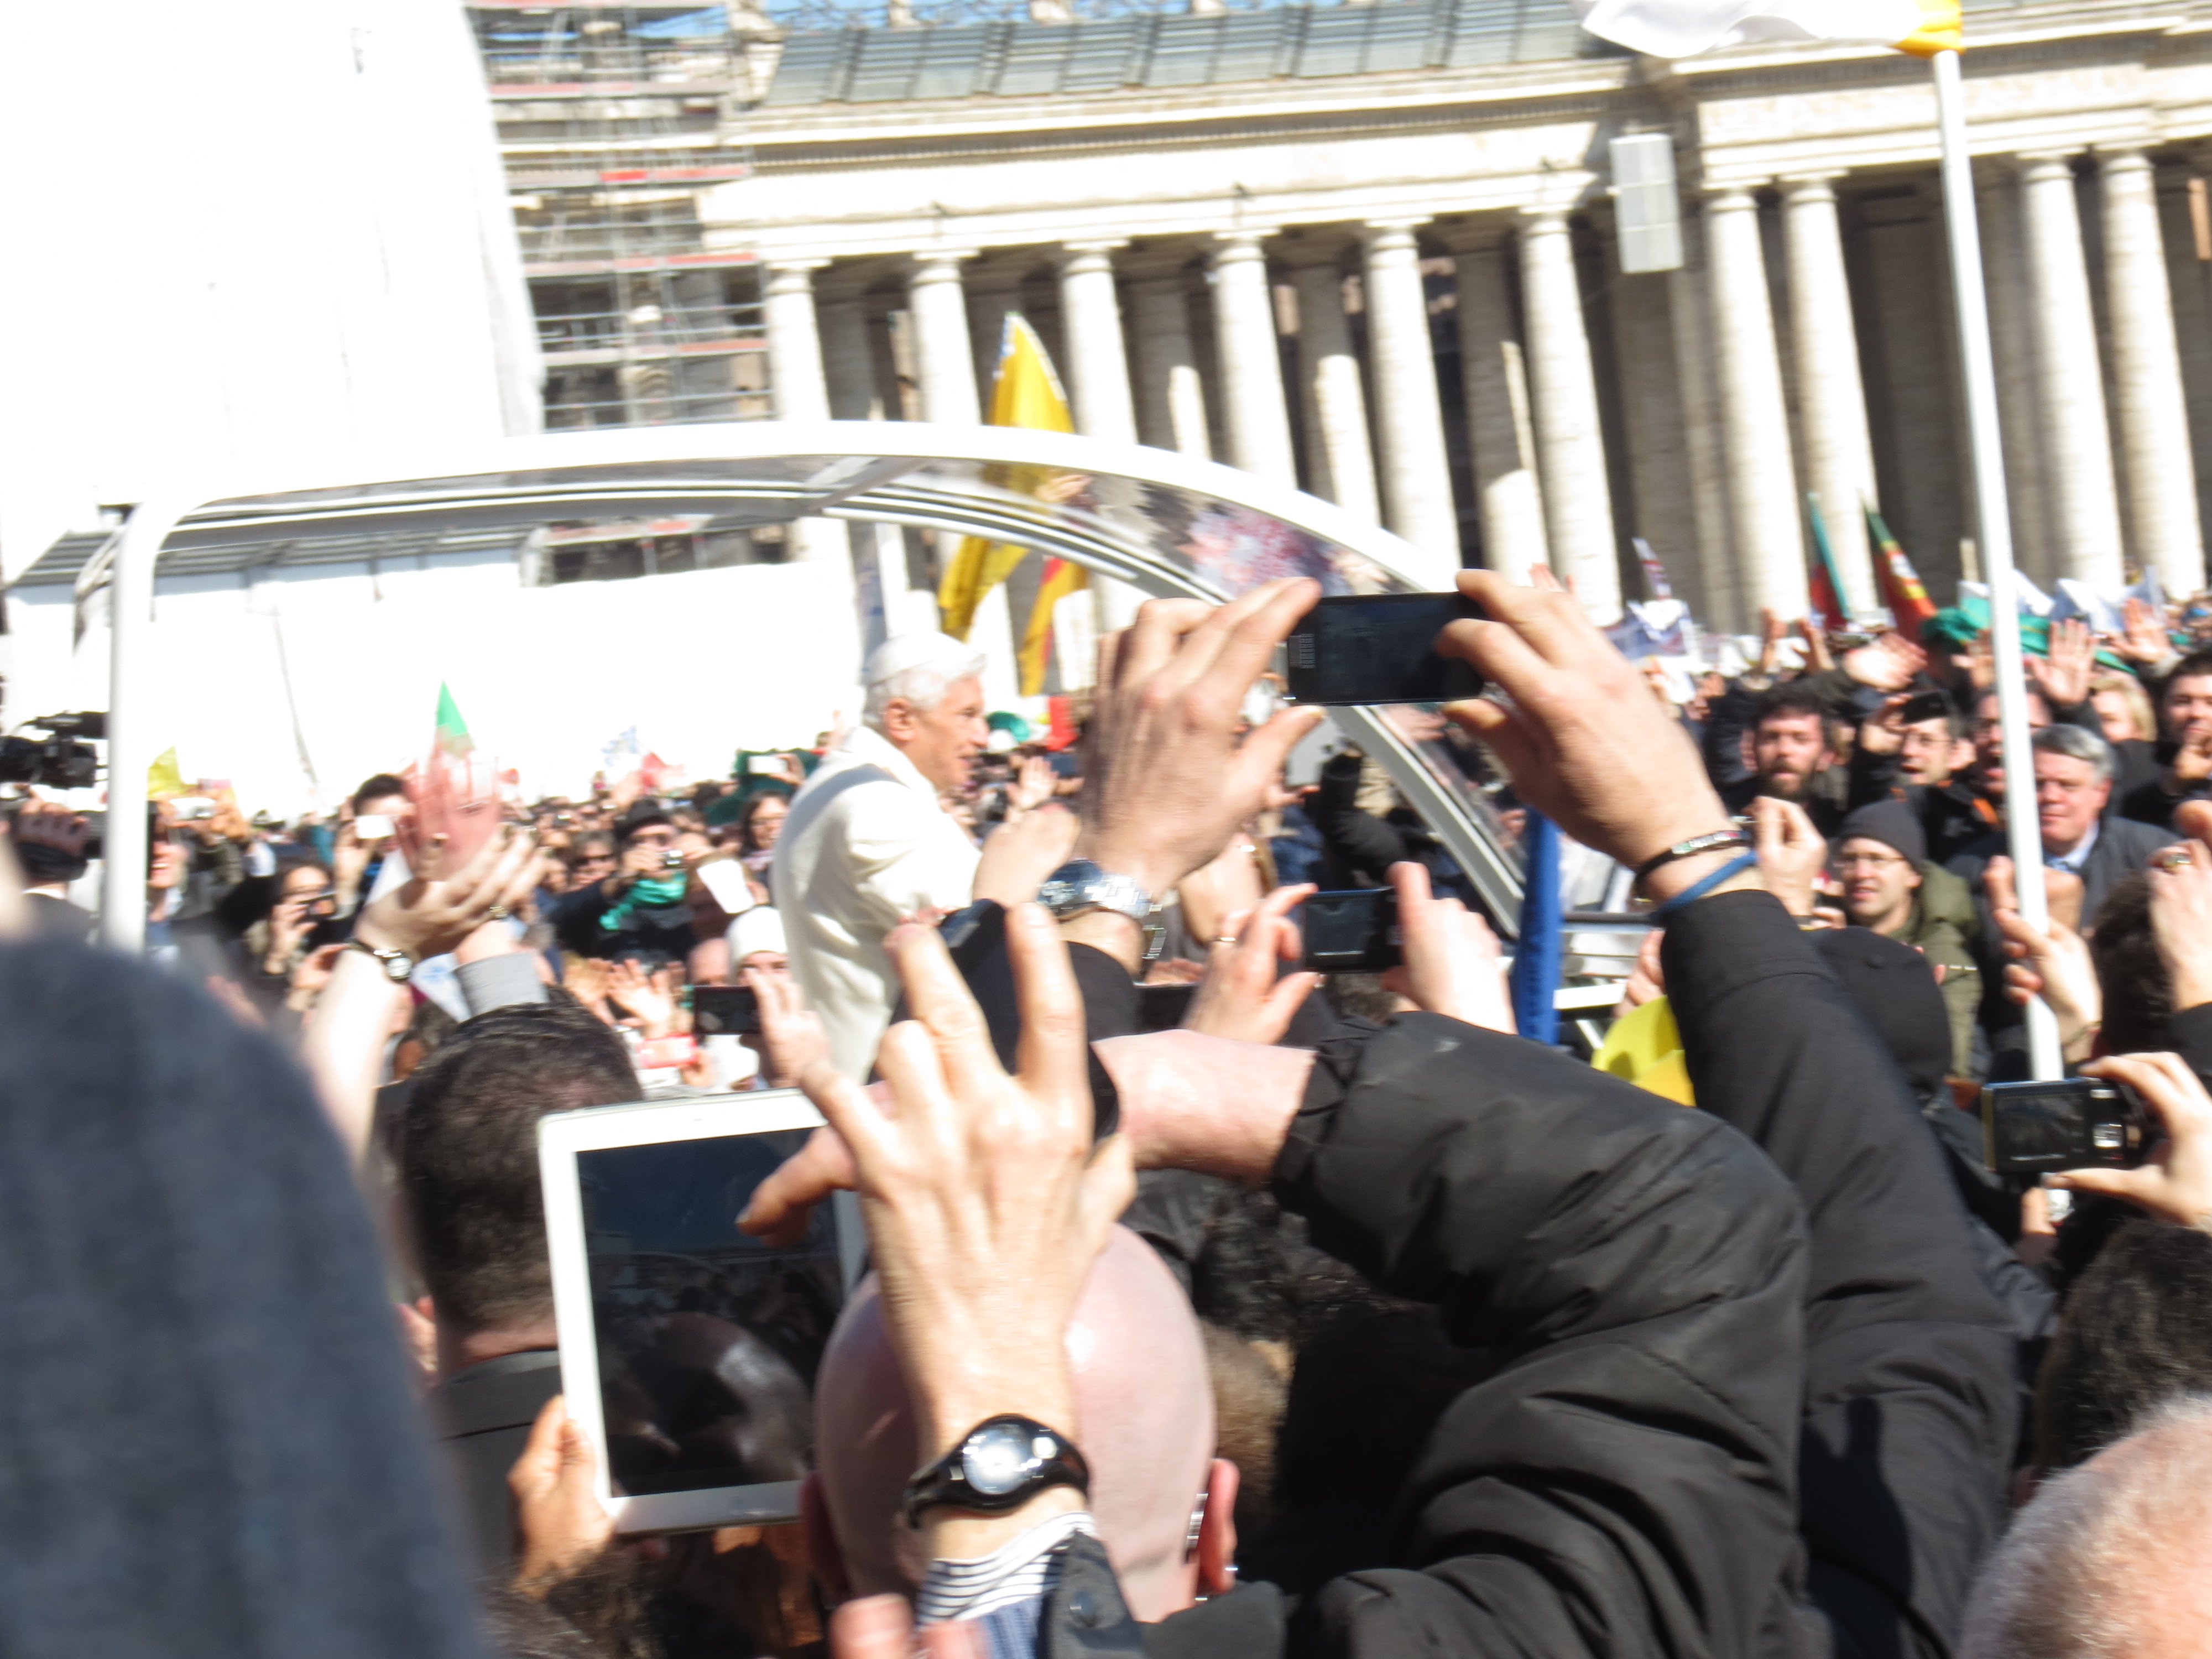 Pope Benedict makes his final tour of St Peter's Square as Pope. Copyright: Caritas/Michelle Hough